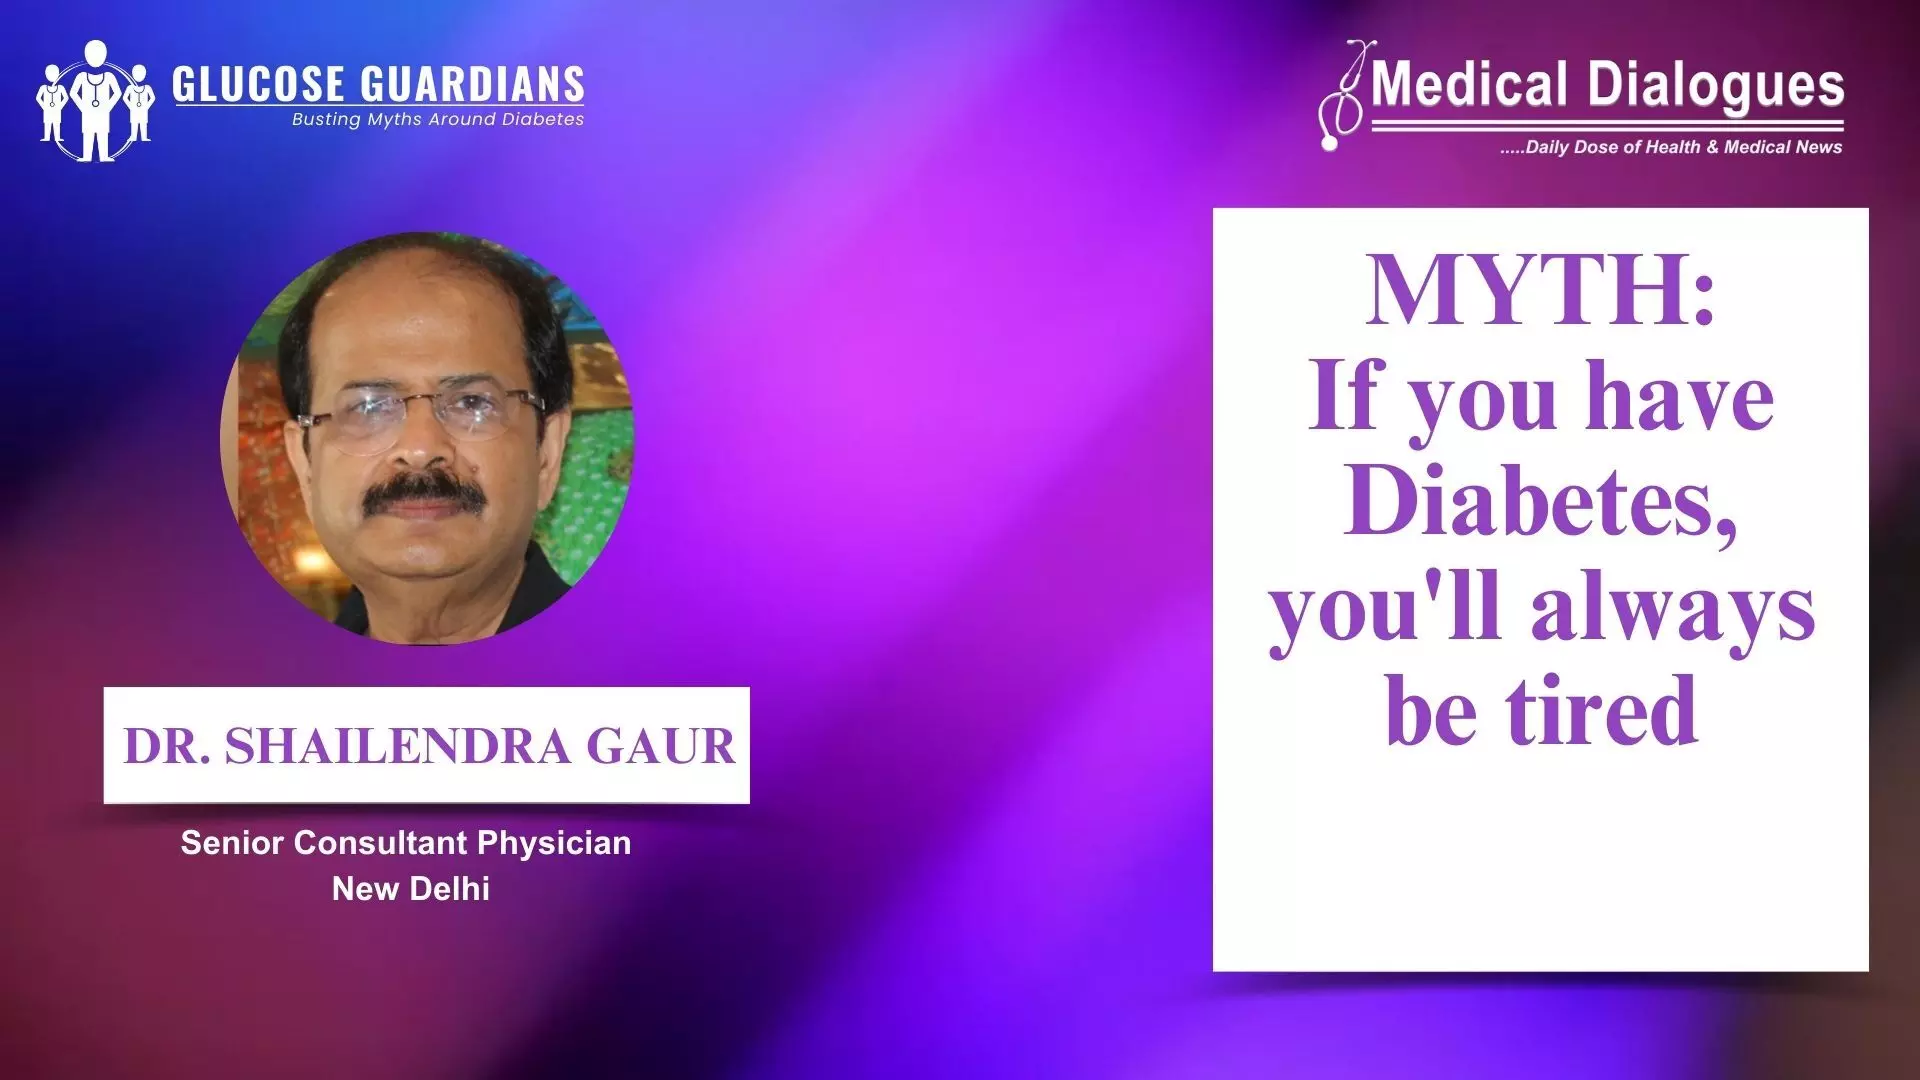 Tiredness and Diabetes: Dispelling Myths About Constant Fatigue - Dr Shailendra Gaur